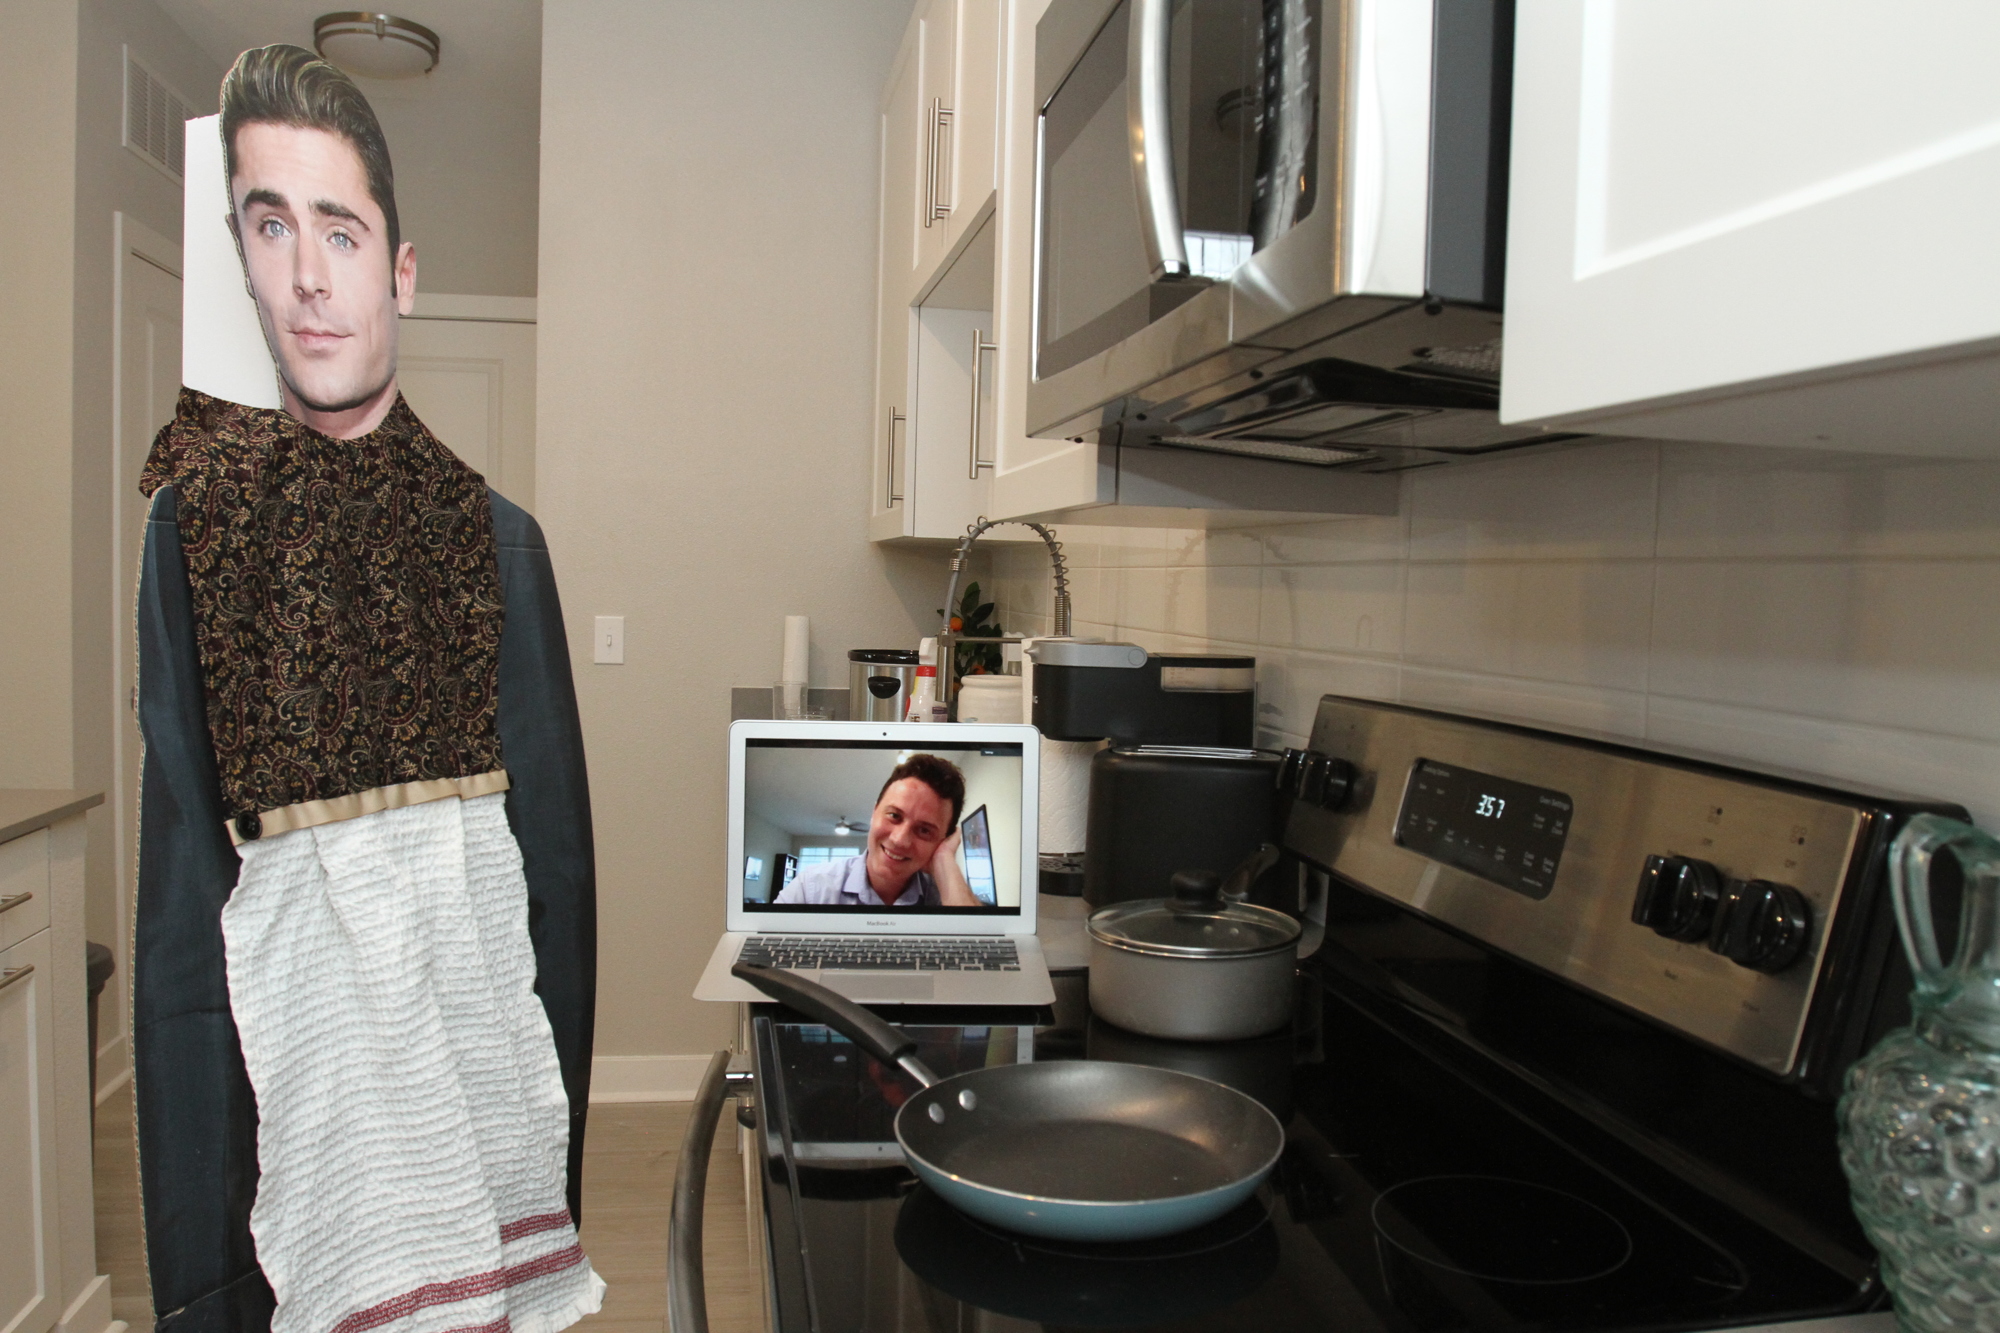 Virtual cooking dates are a great way to admire someone from very, very far away.